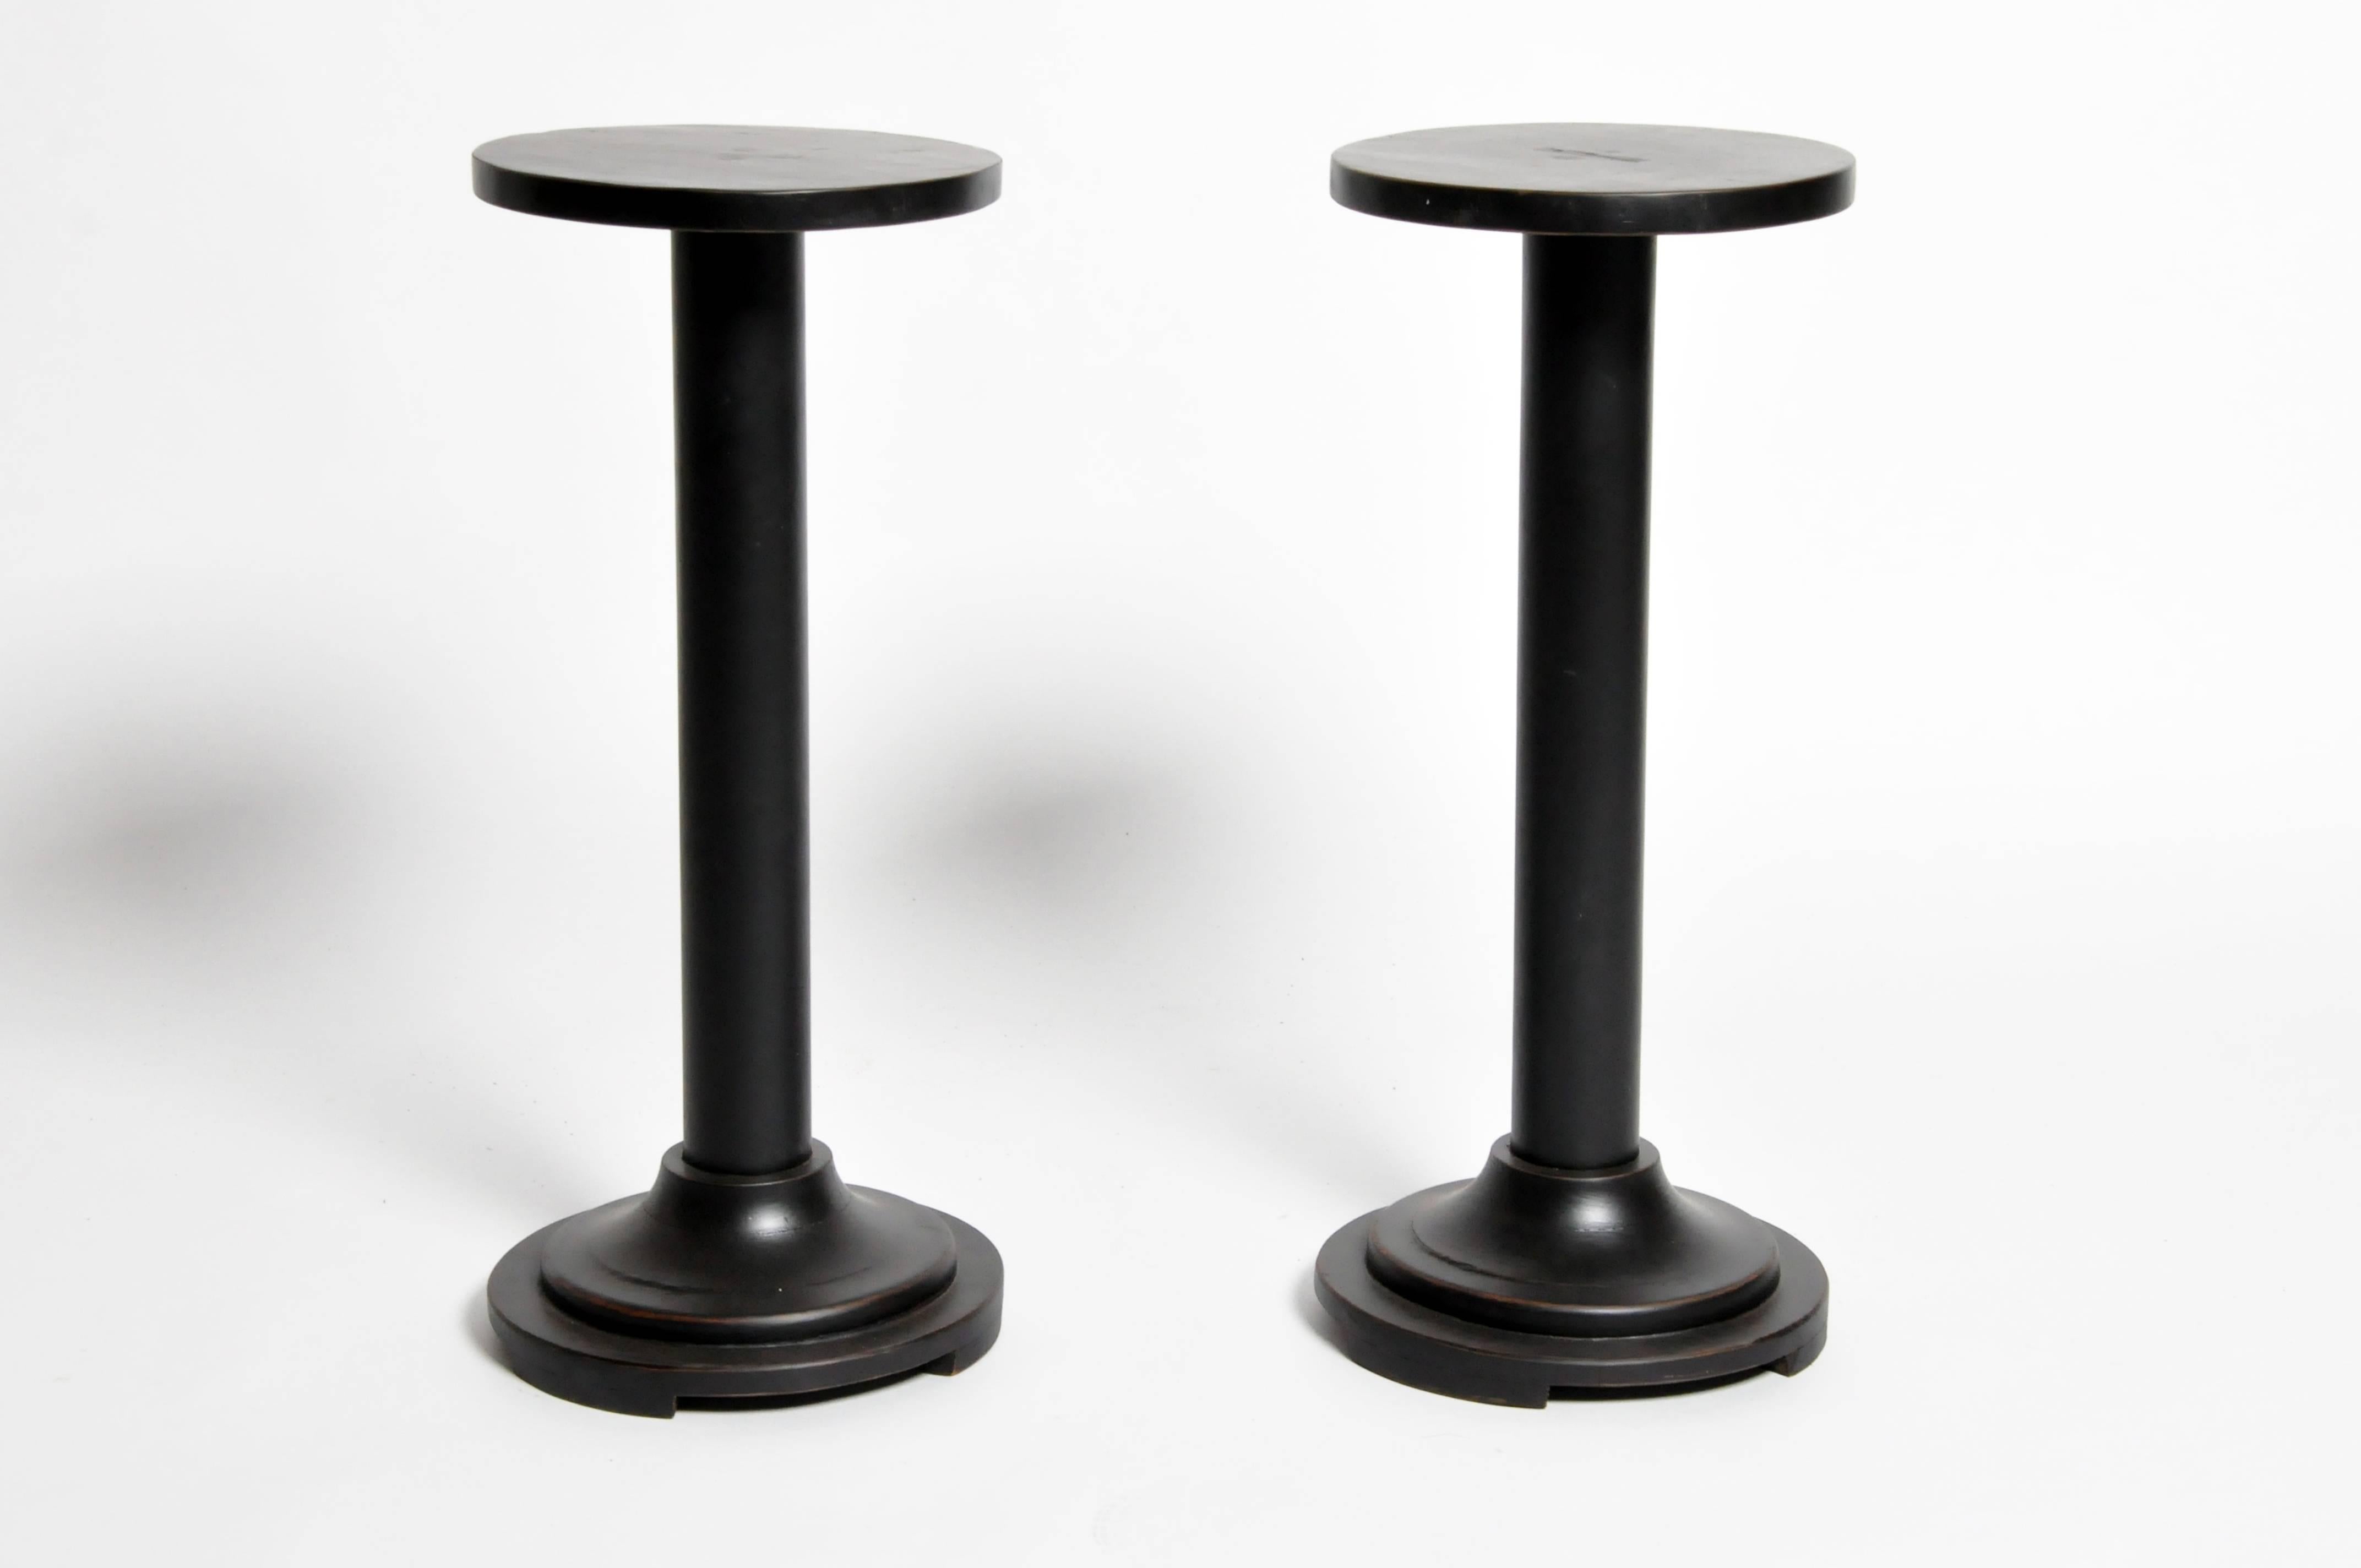 These small round wooden stands are from Rangoon, Burma and are made from teak wood, circa 1950.